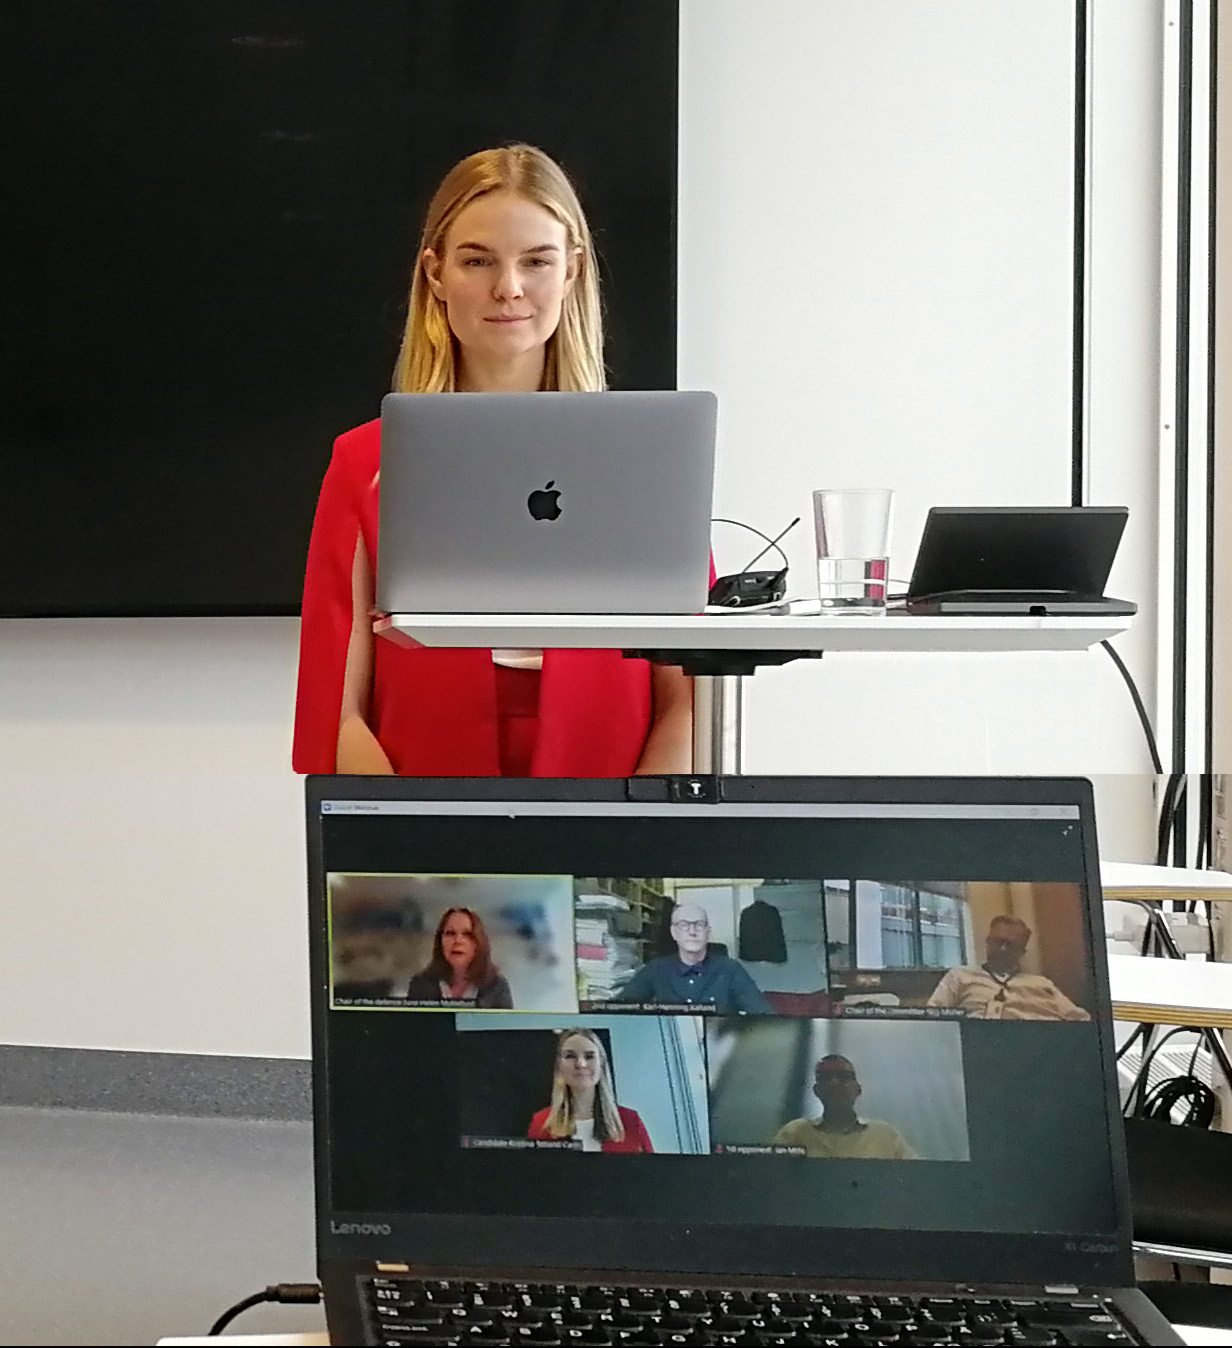 The dissertation was held over zoom, and also broadcasted to an auditorium (Photo: Anne Cathrine Bakken)